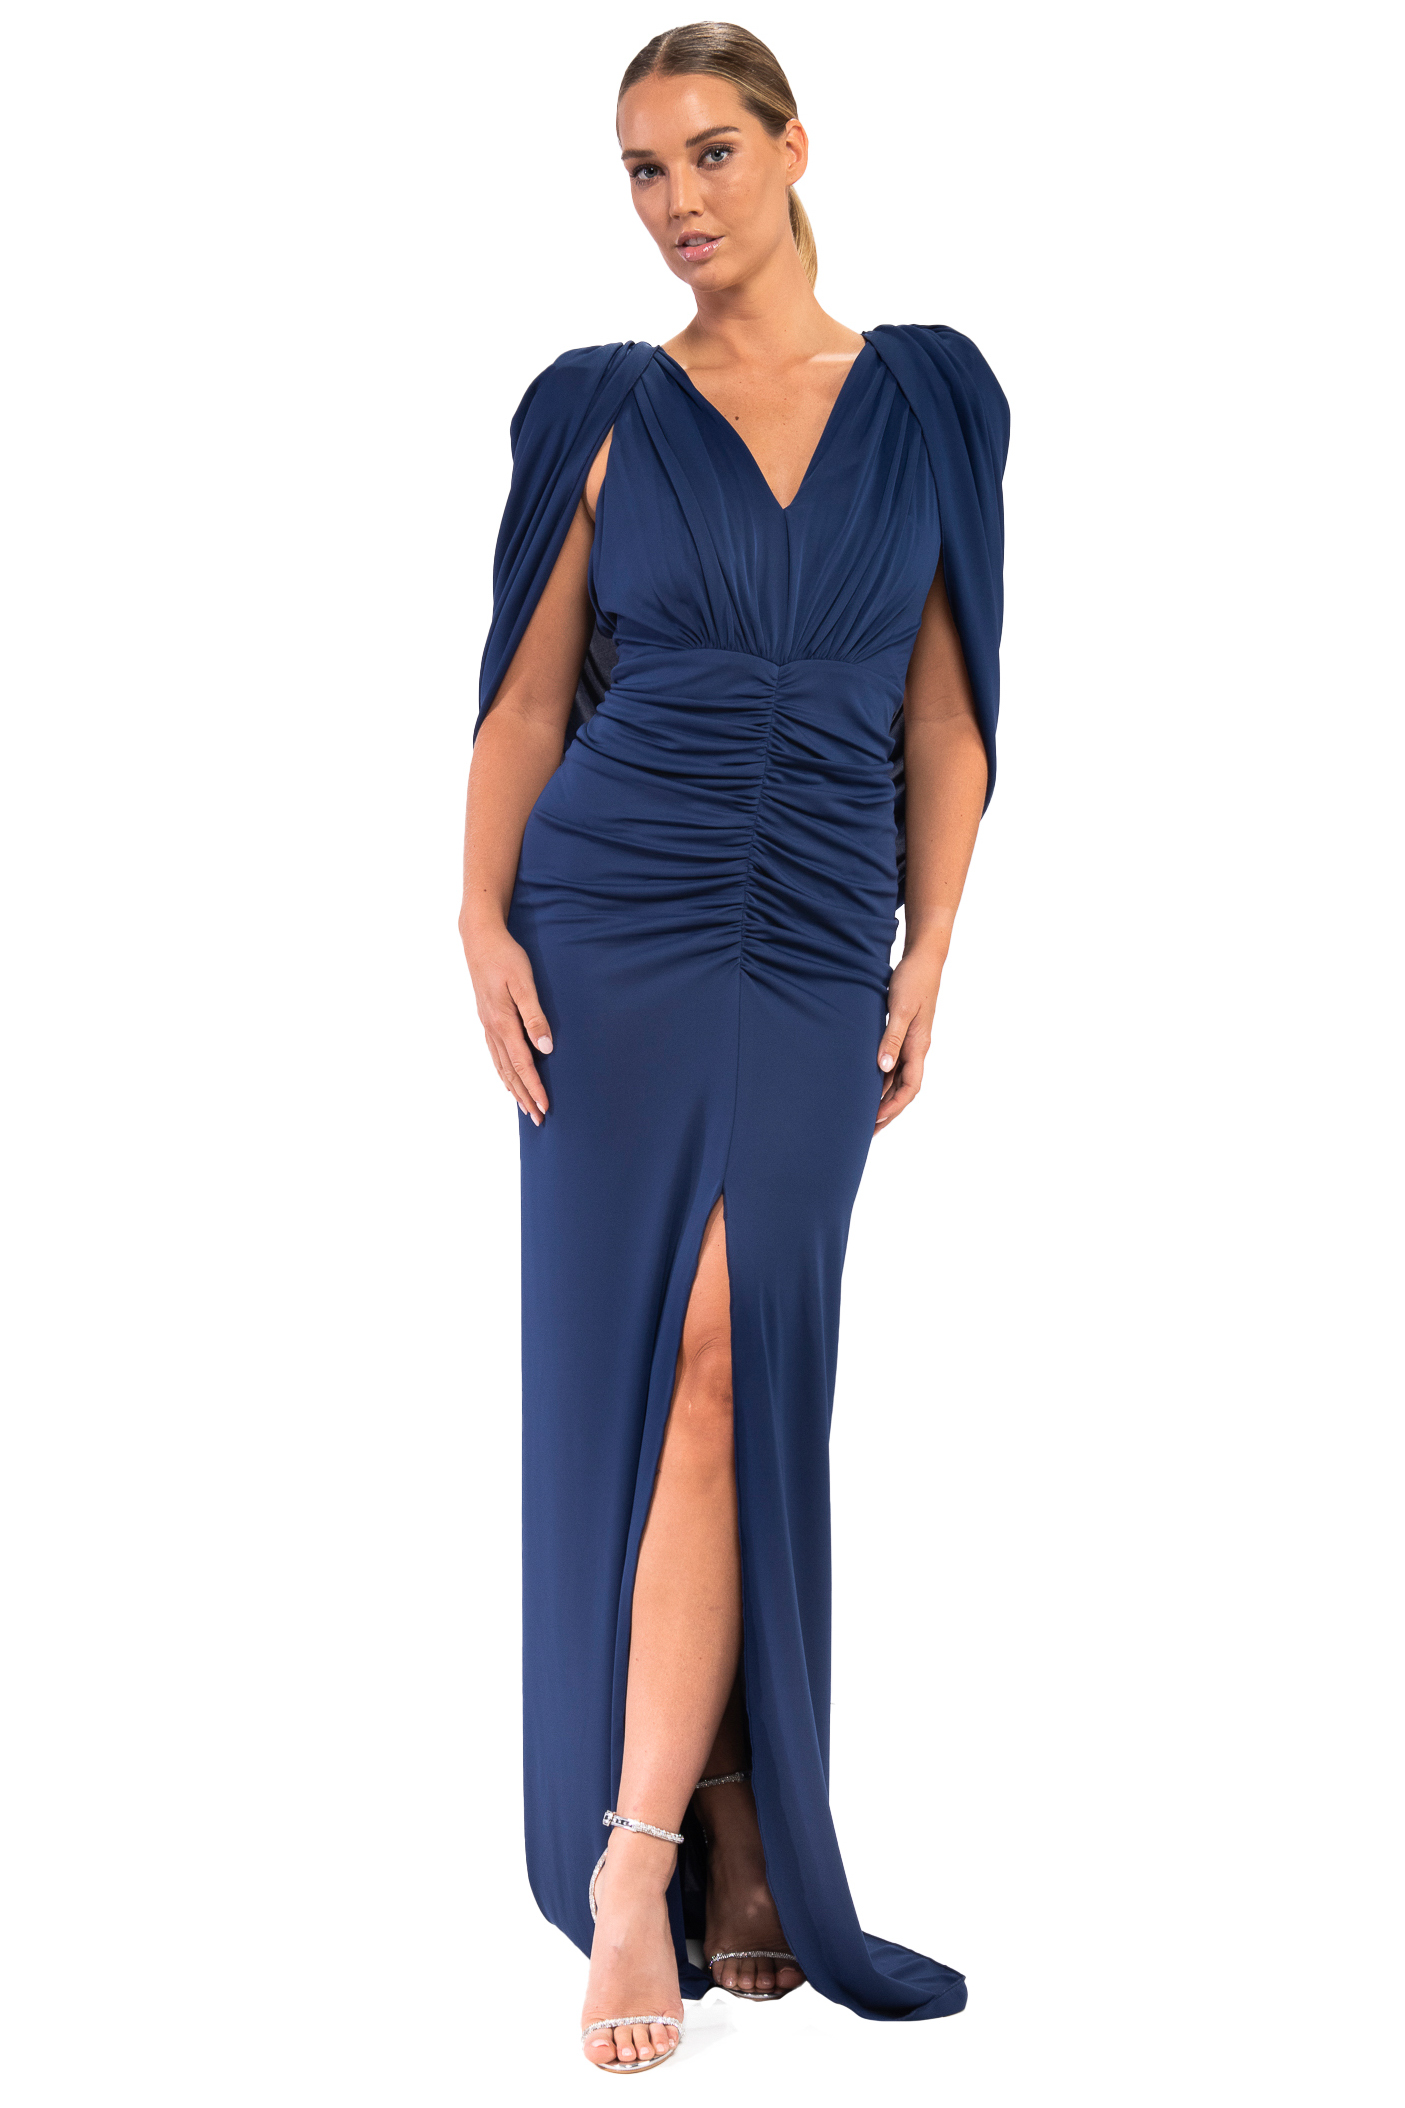 Full Length Dress With Caped Sleeves. Drape 24 Long - Catherines